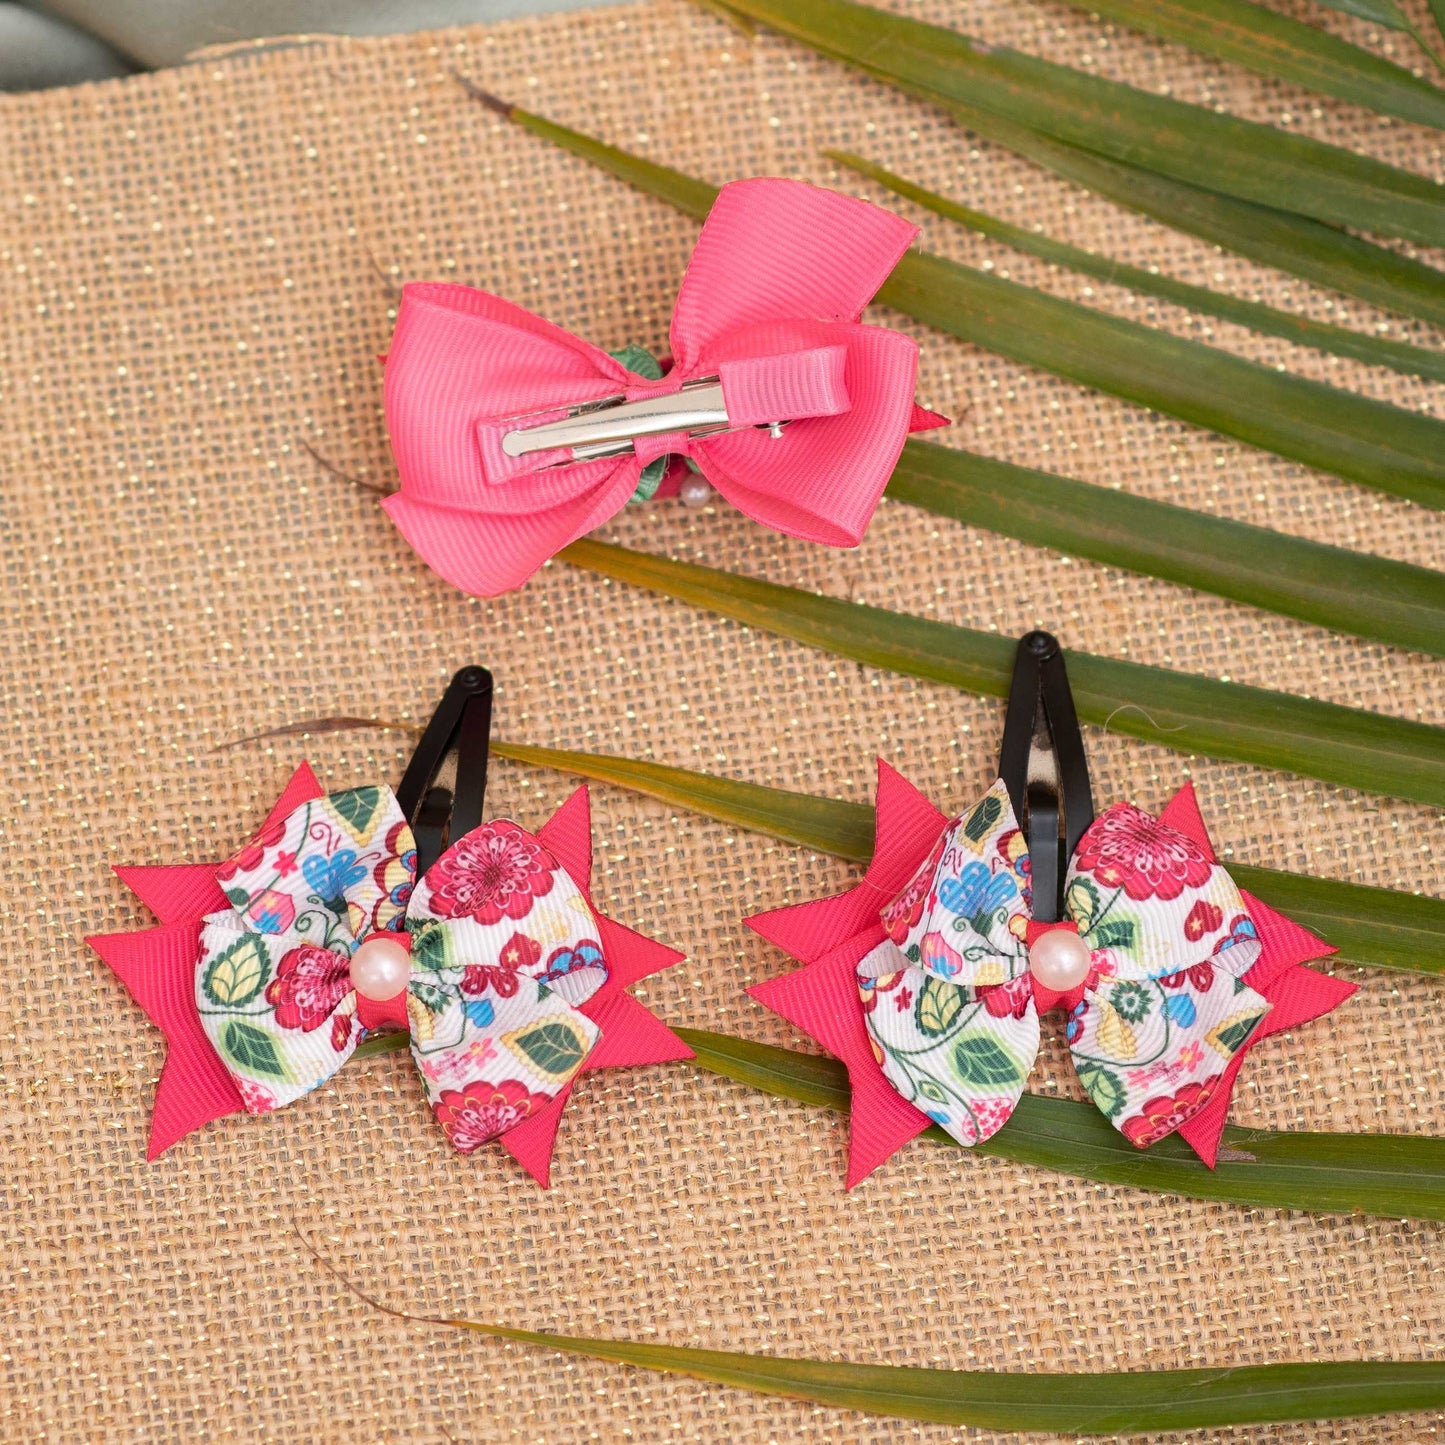 Combo: Fancy bow with felt roses and pearls on alligator clip along with flower print bow on tic-tac pins - Pink and Green (Set of 1 pair, 1 single bow 3 quantity)